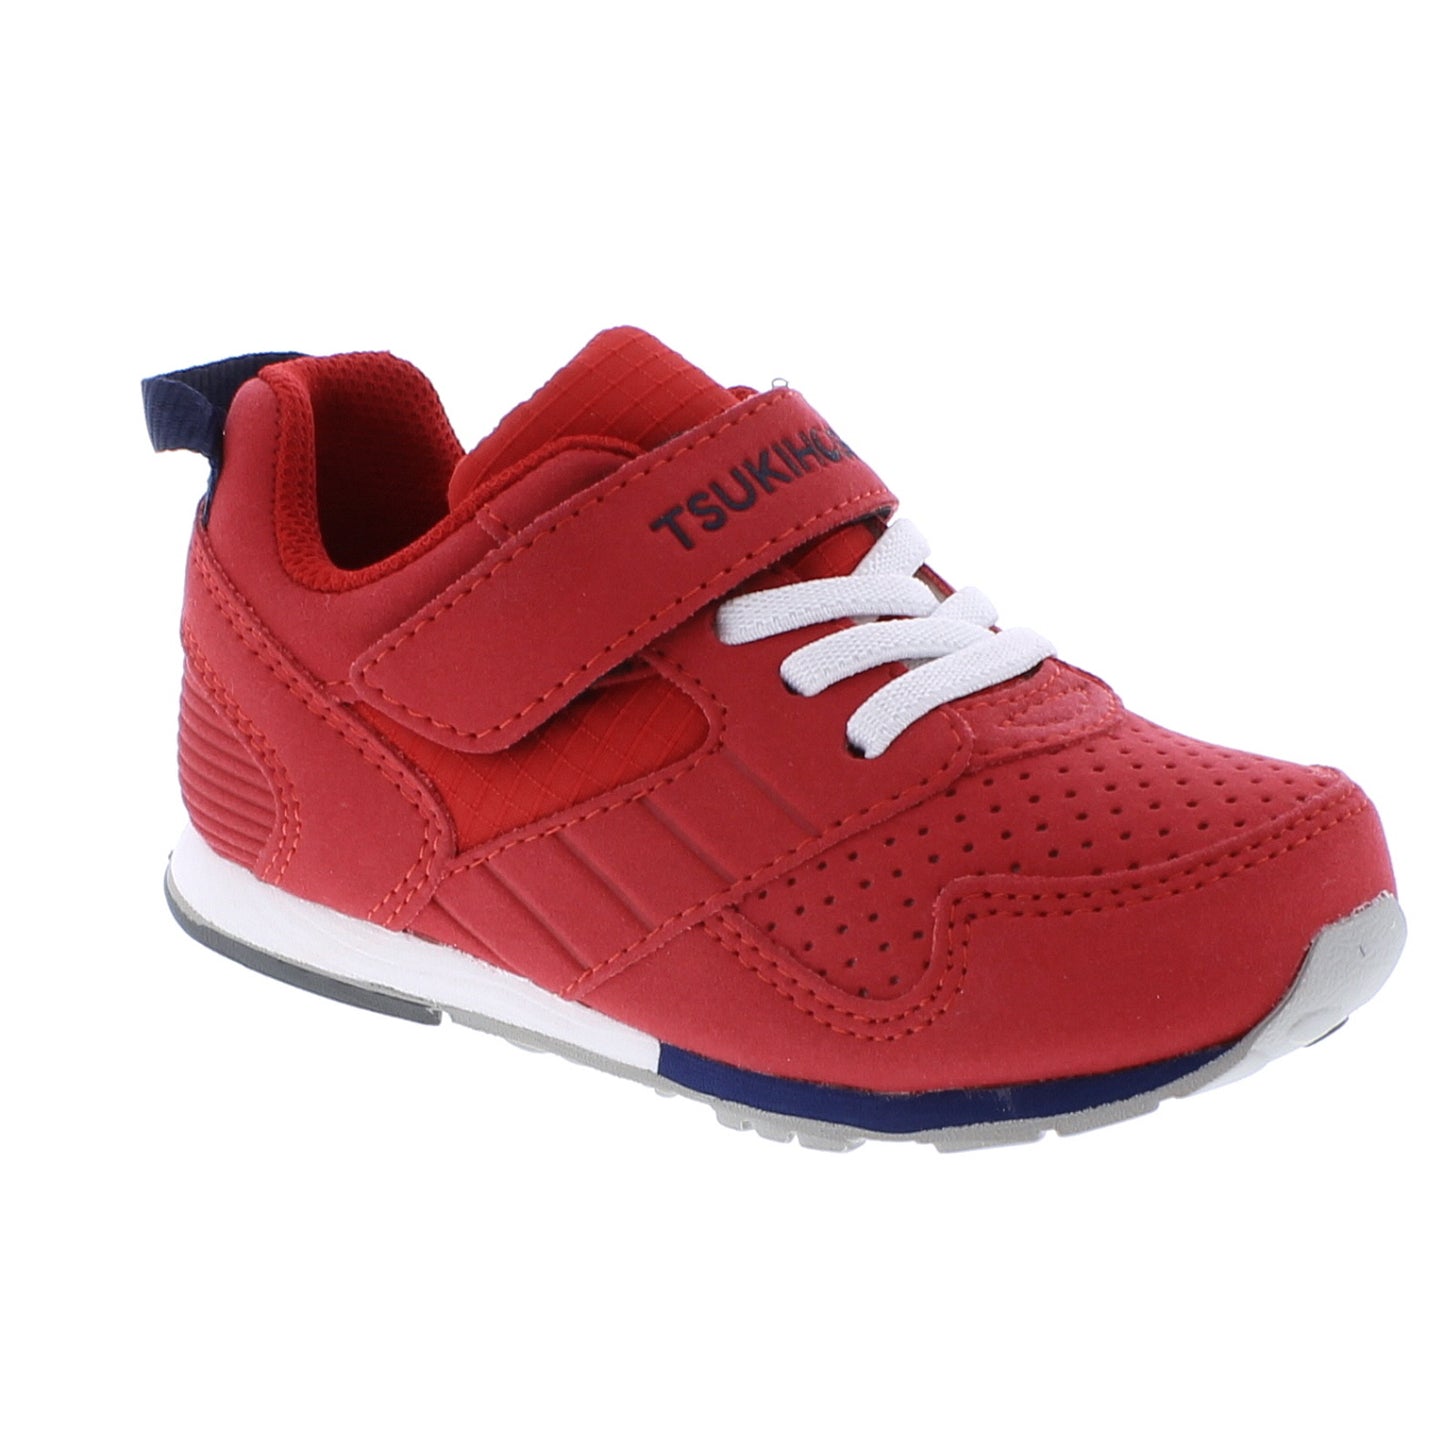 Tsukihoshi Baby Racer - Red/Navy (Infant Sizes 3.5 to 6.5)